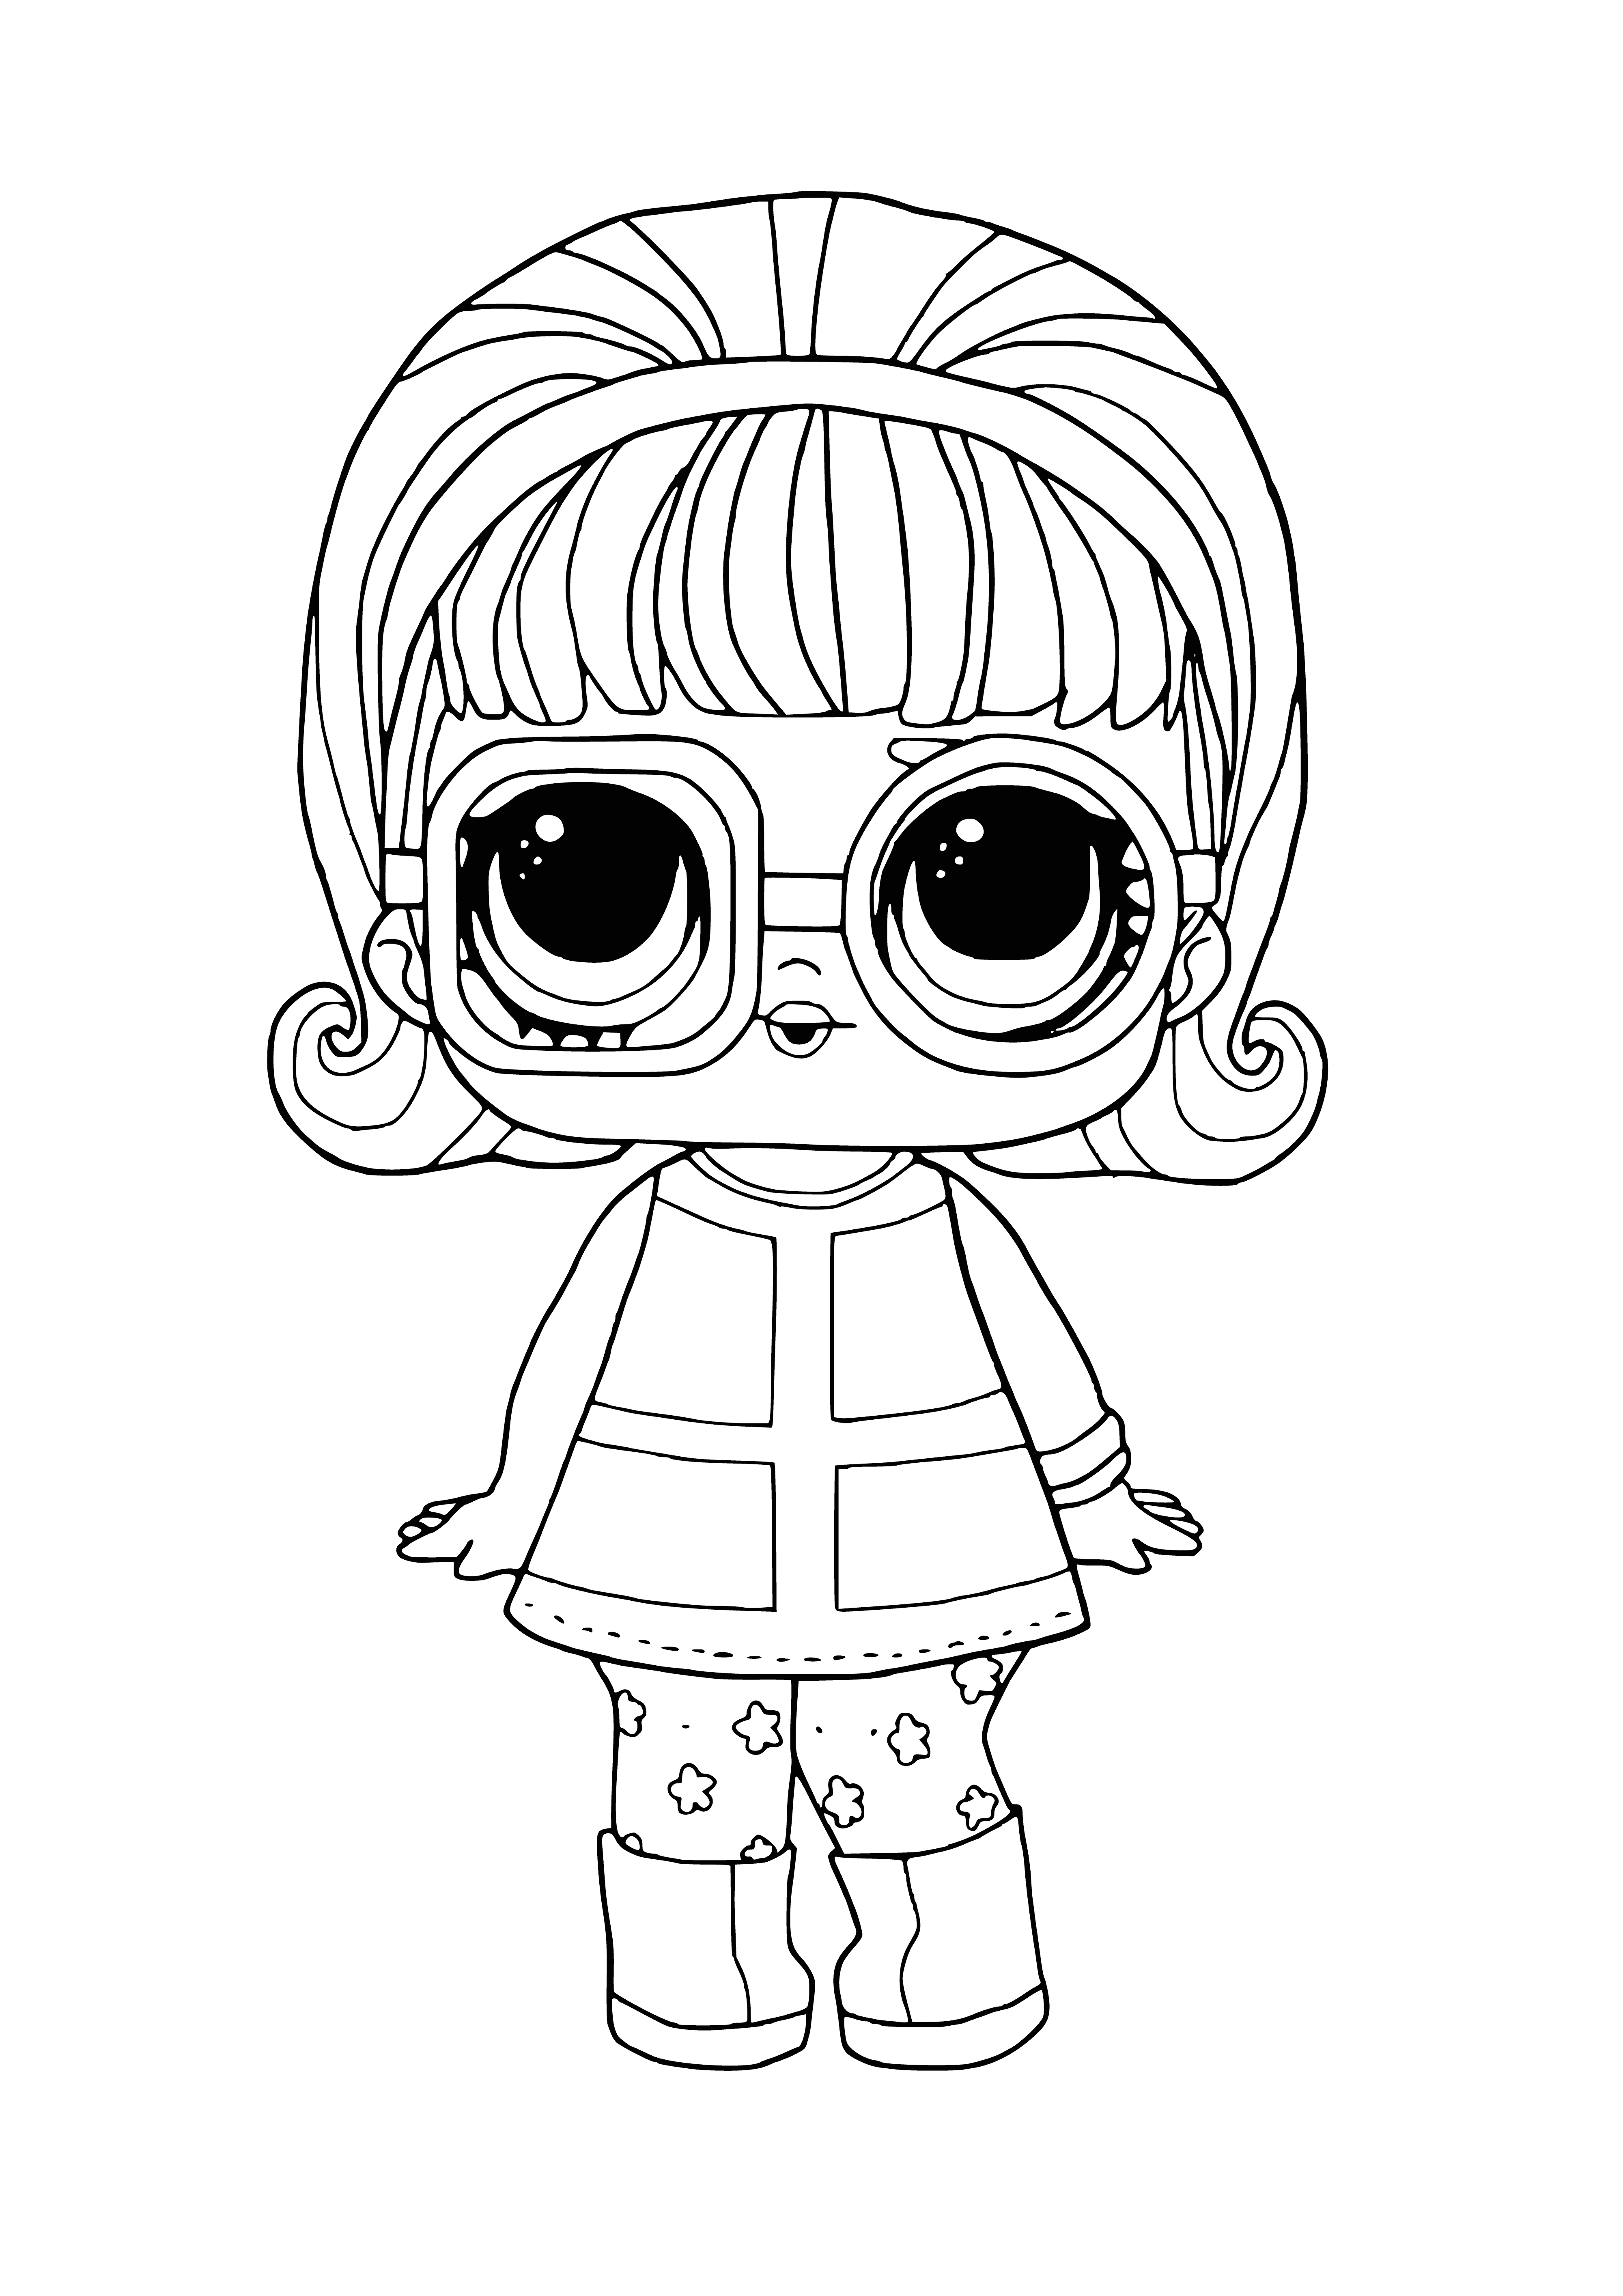 coloring page: Girl with blue eyes & blue clothes holds mic & record, brightening up blue backdrop with stars. #music #performance